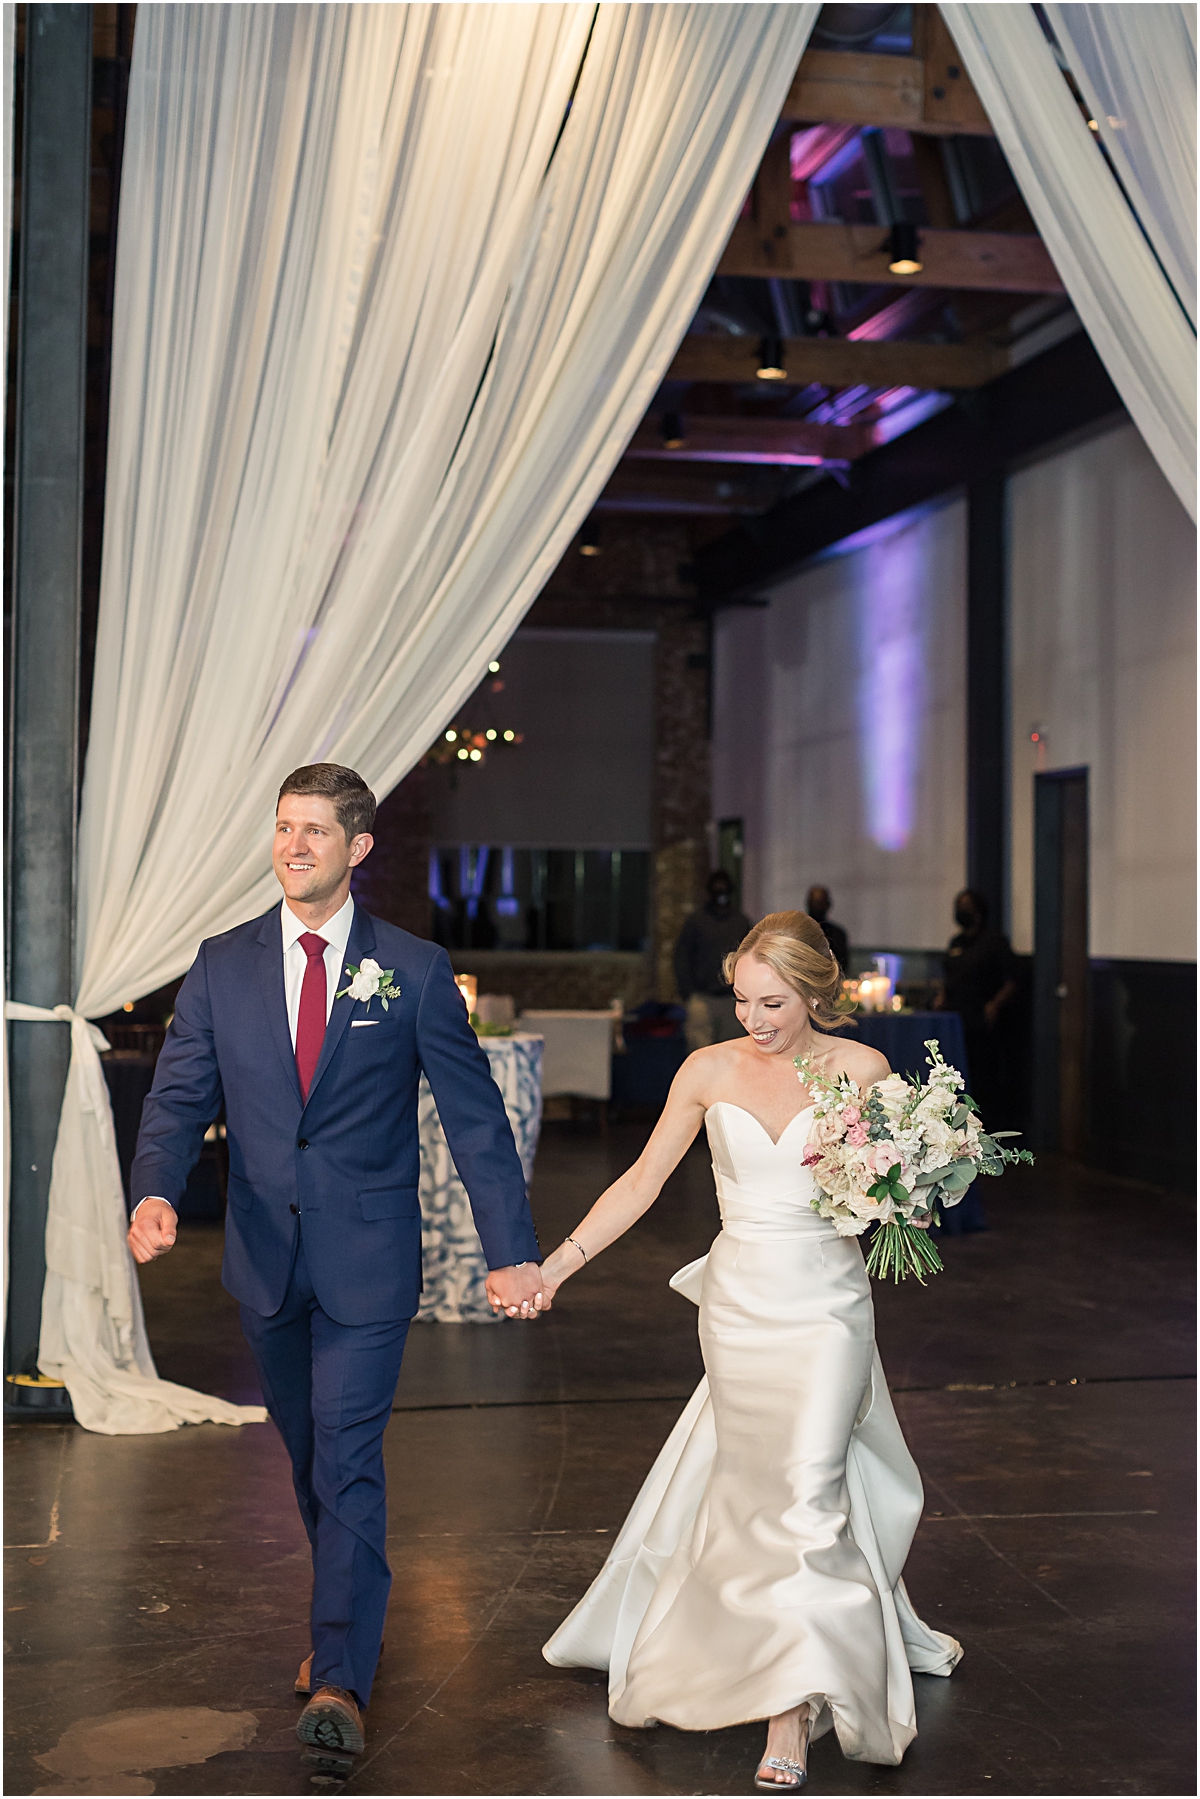 Rebecca + John walking into their reception at The Foundry at Puritan Mill